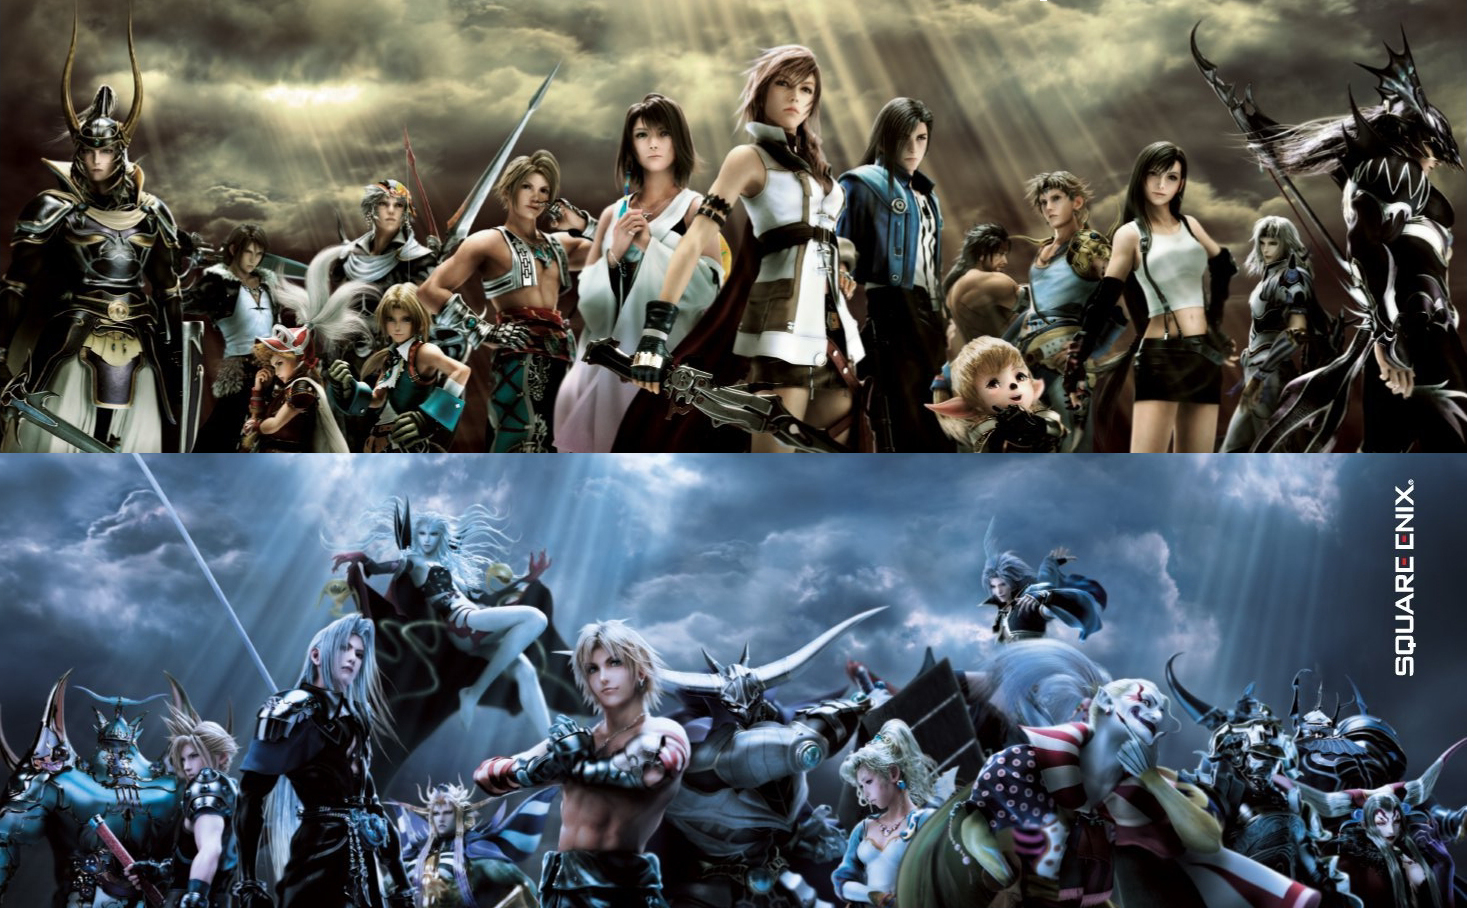 Collage of characters from the Final Fantasy series (from Dissidia 012 Final Fantasy)